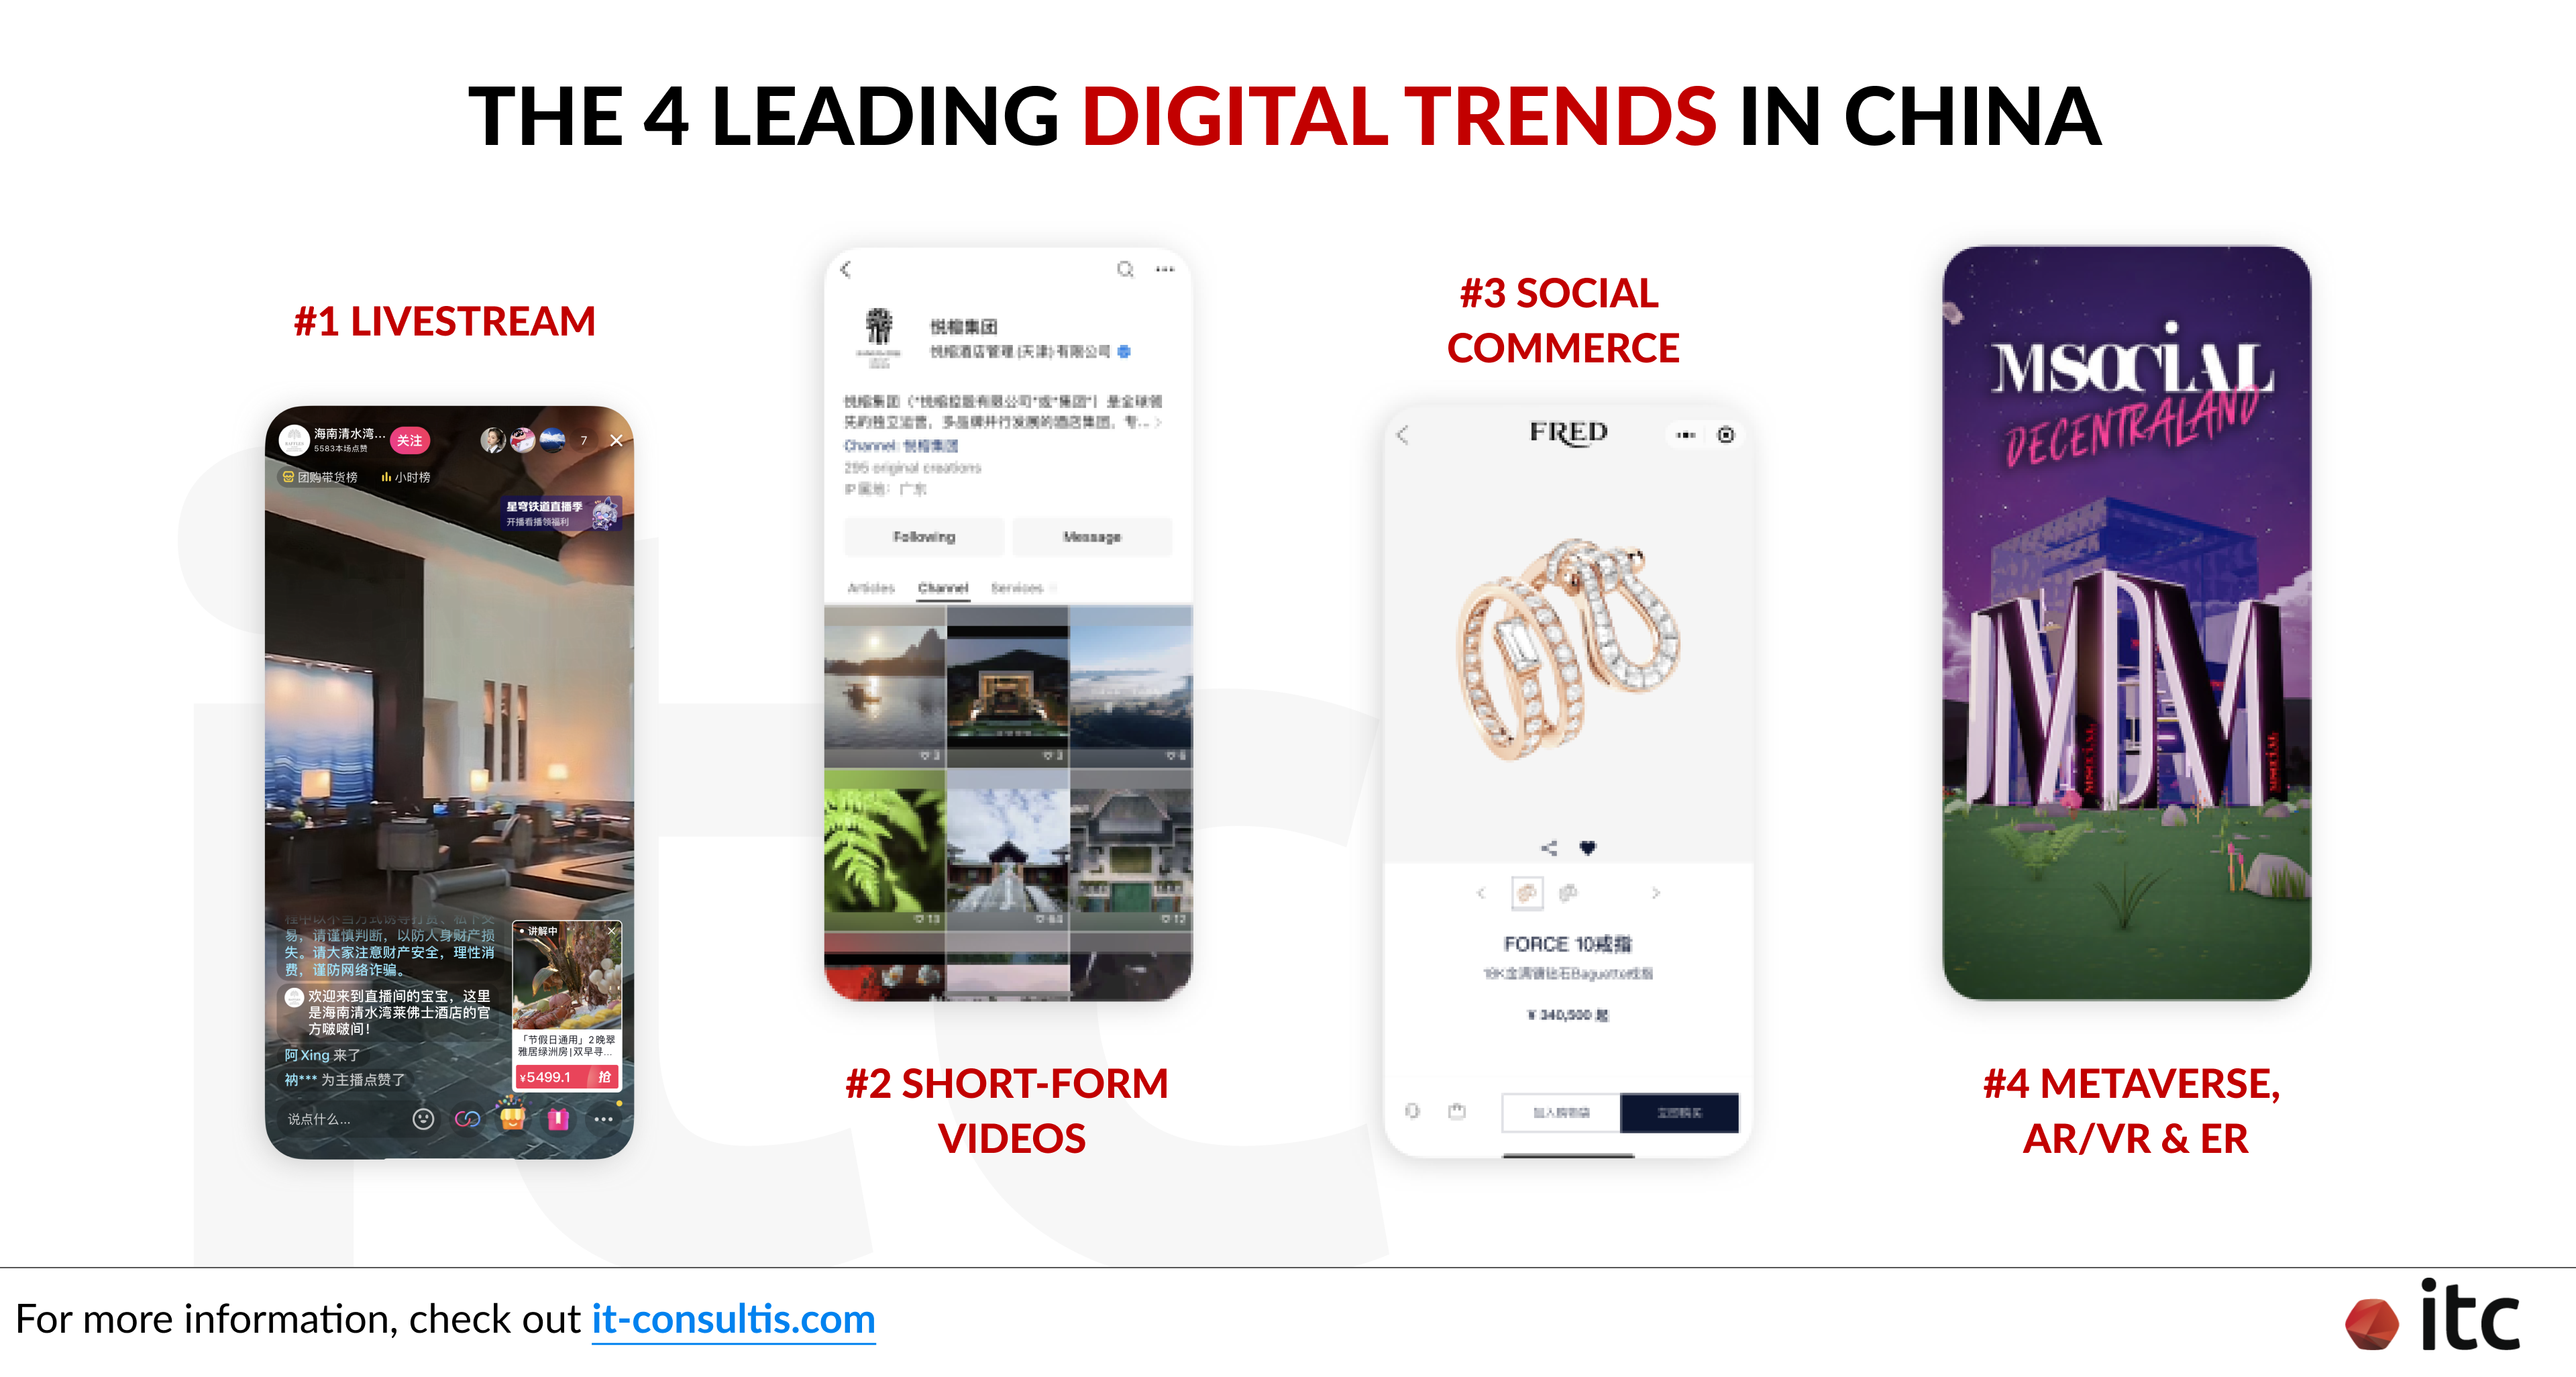 Top 4 leading Digital Trends in China